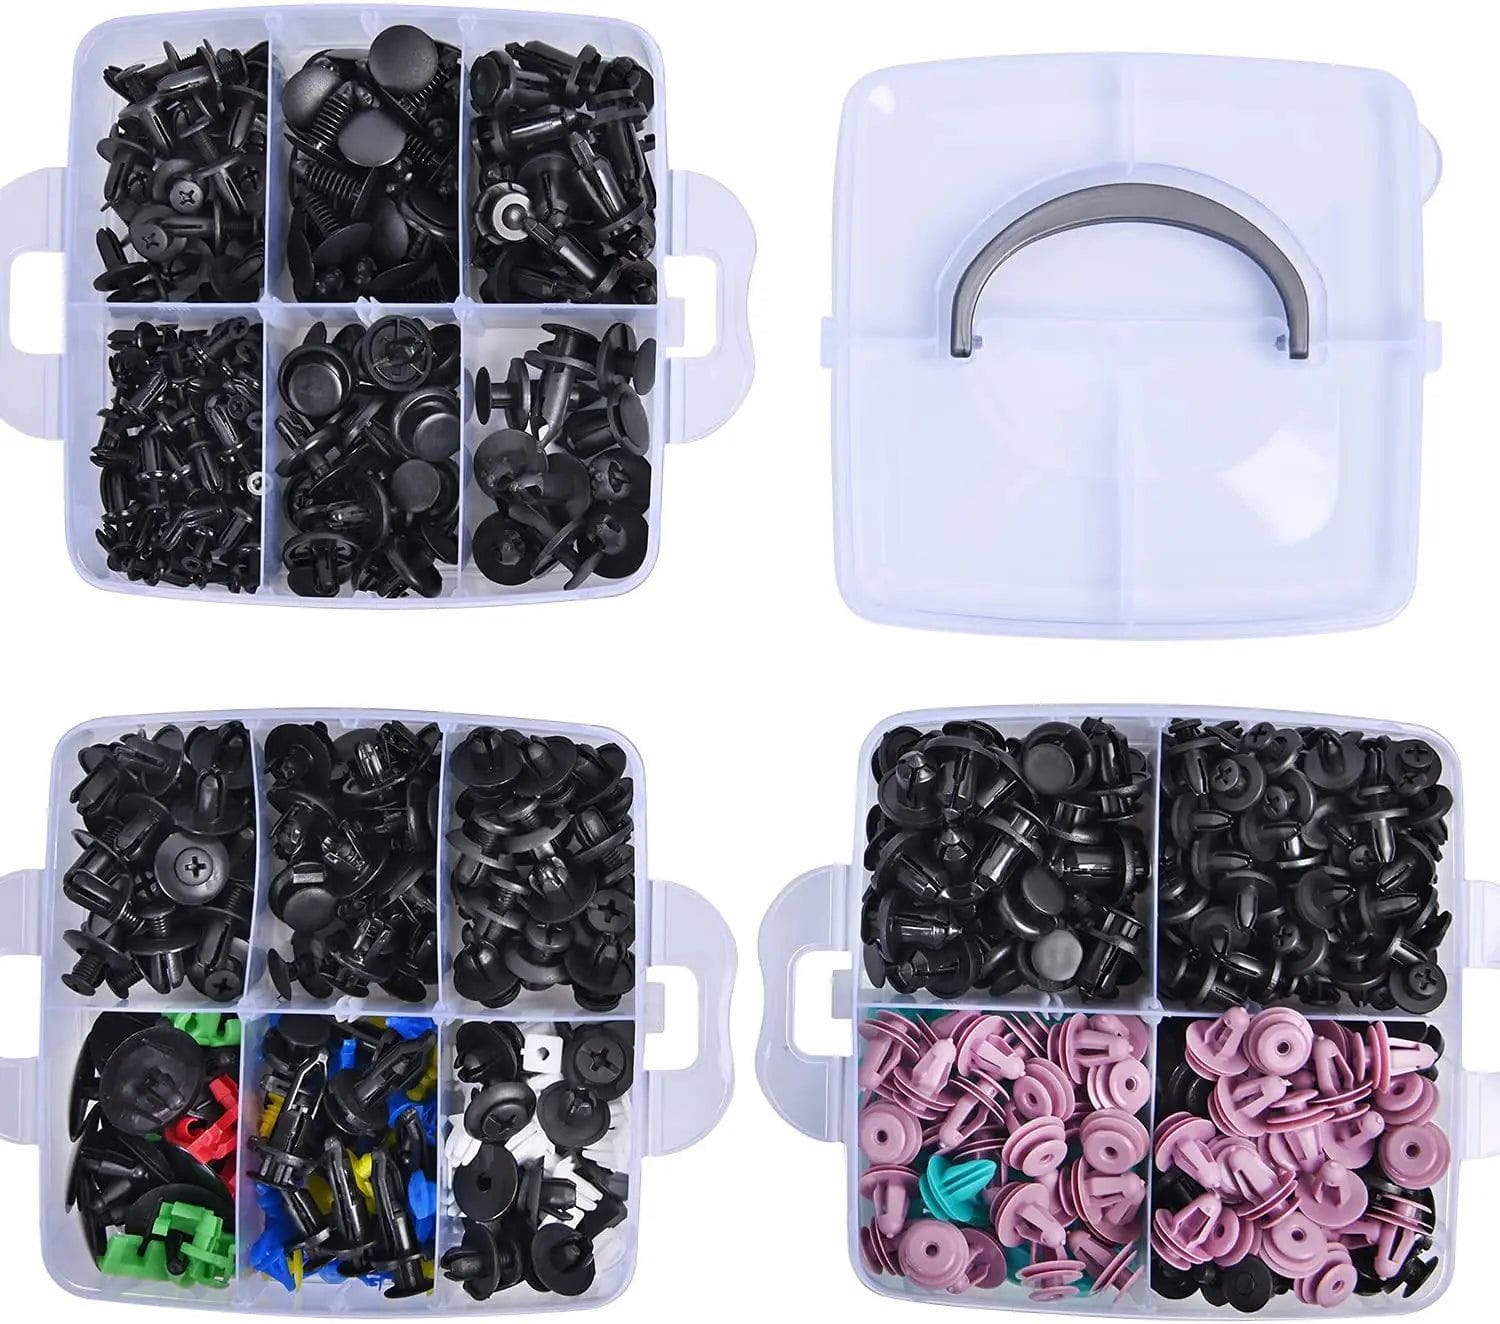 retainer clips 725 Pcs Car Push Retainer Clips Kits For Toyota GM Ford Honda Chevy